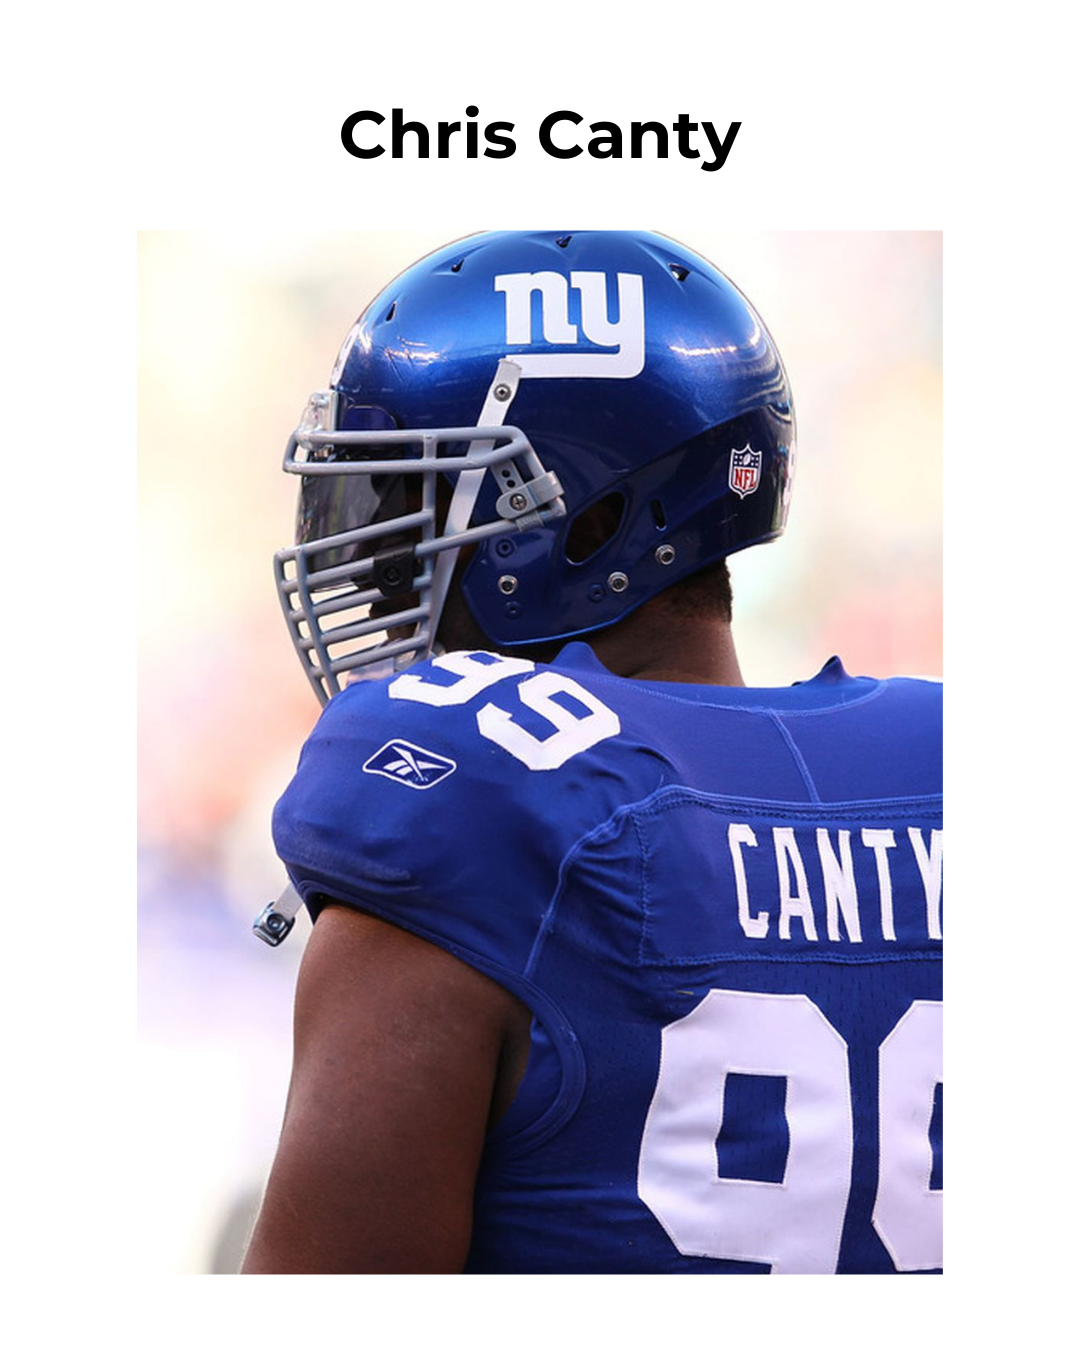 Chris Canty